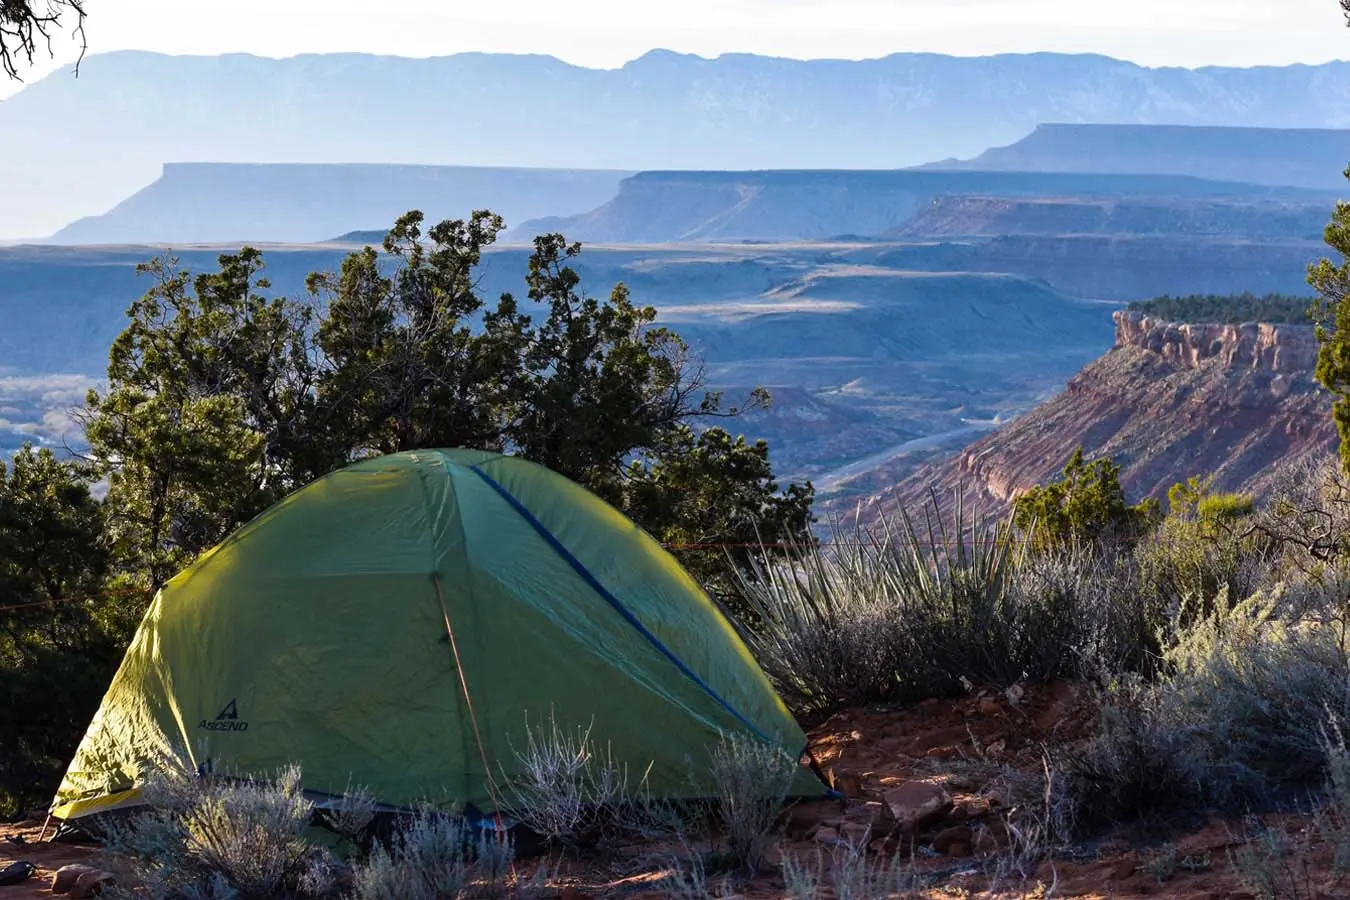 Hot weather summer camping guide